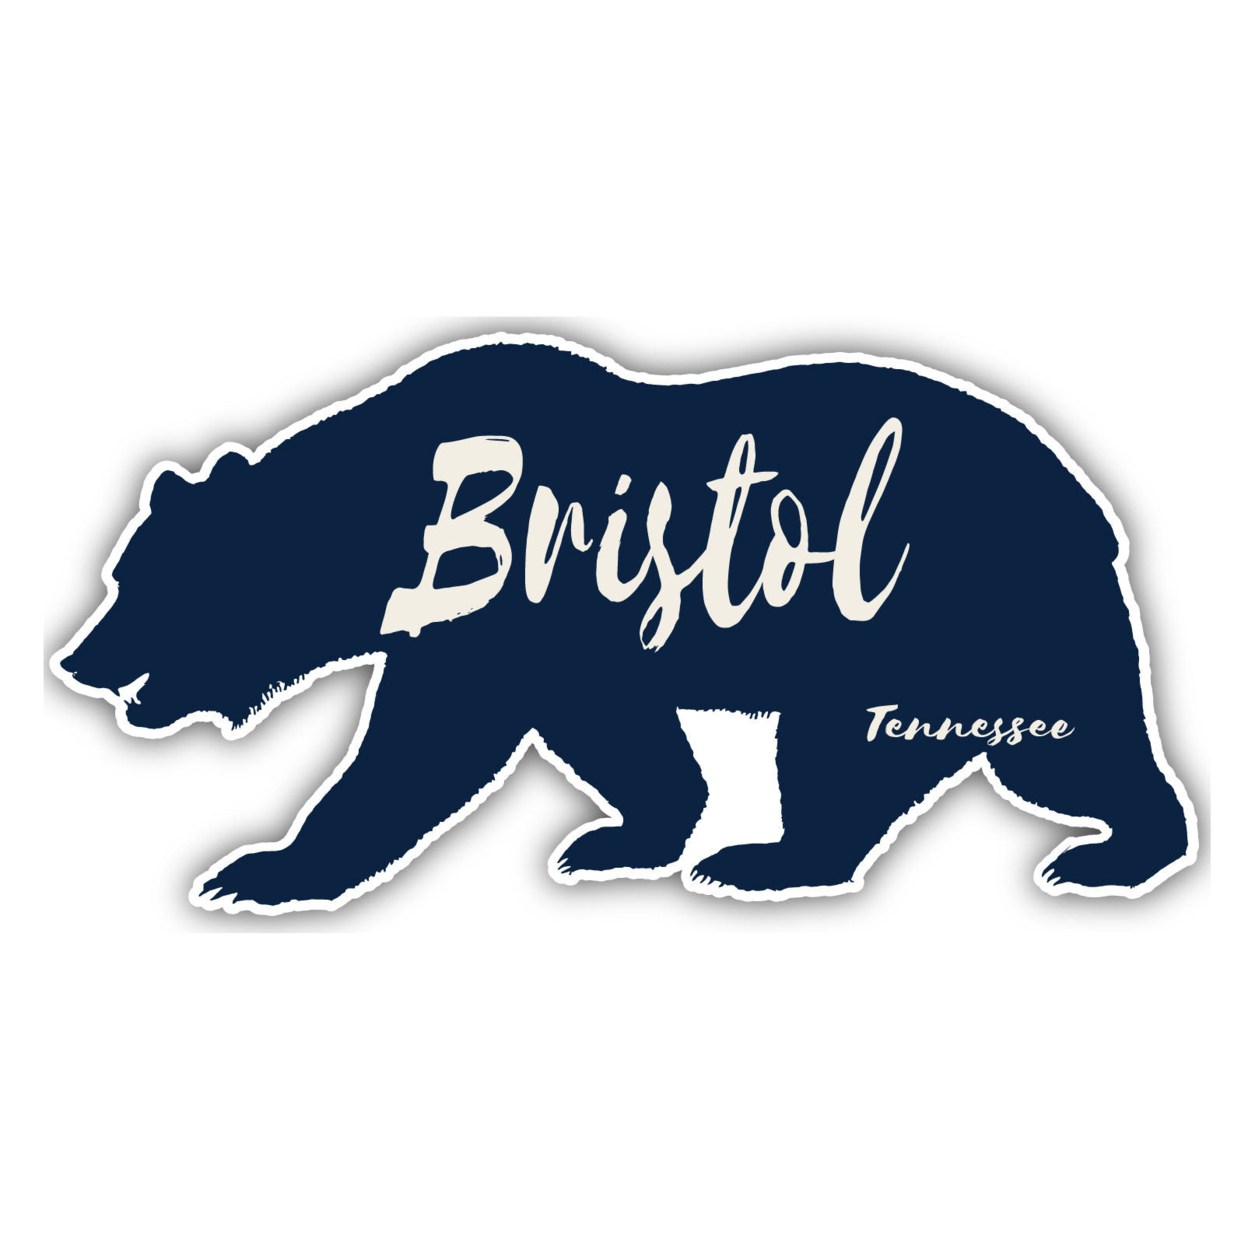 Bristol Tennessee Souvenir Decorative Stickers (Choose Theme And Size) - 4-Pack, 8-Inch, Bear